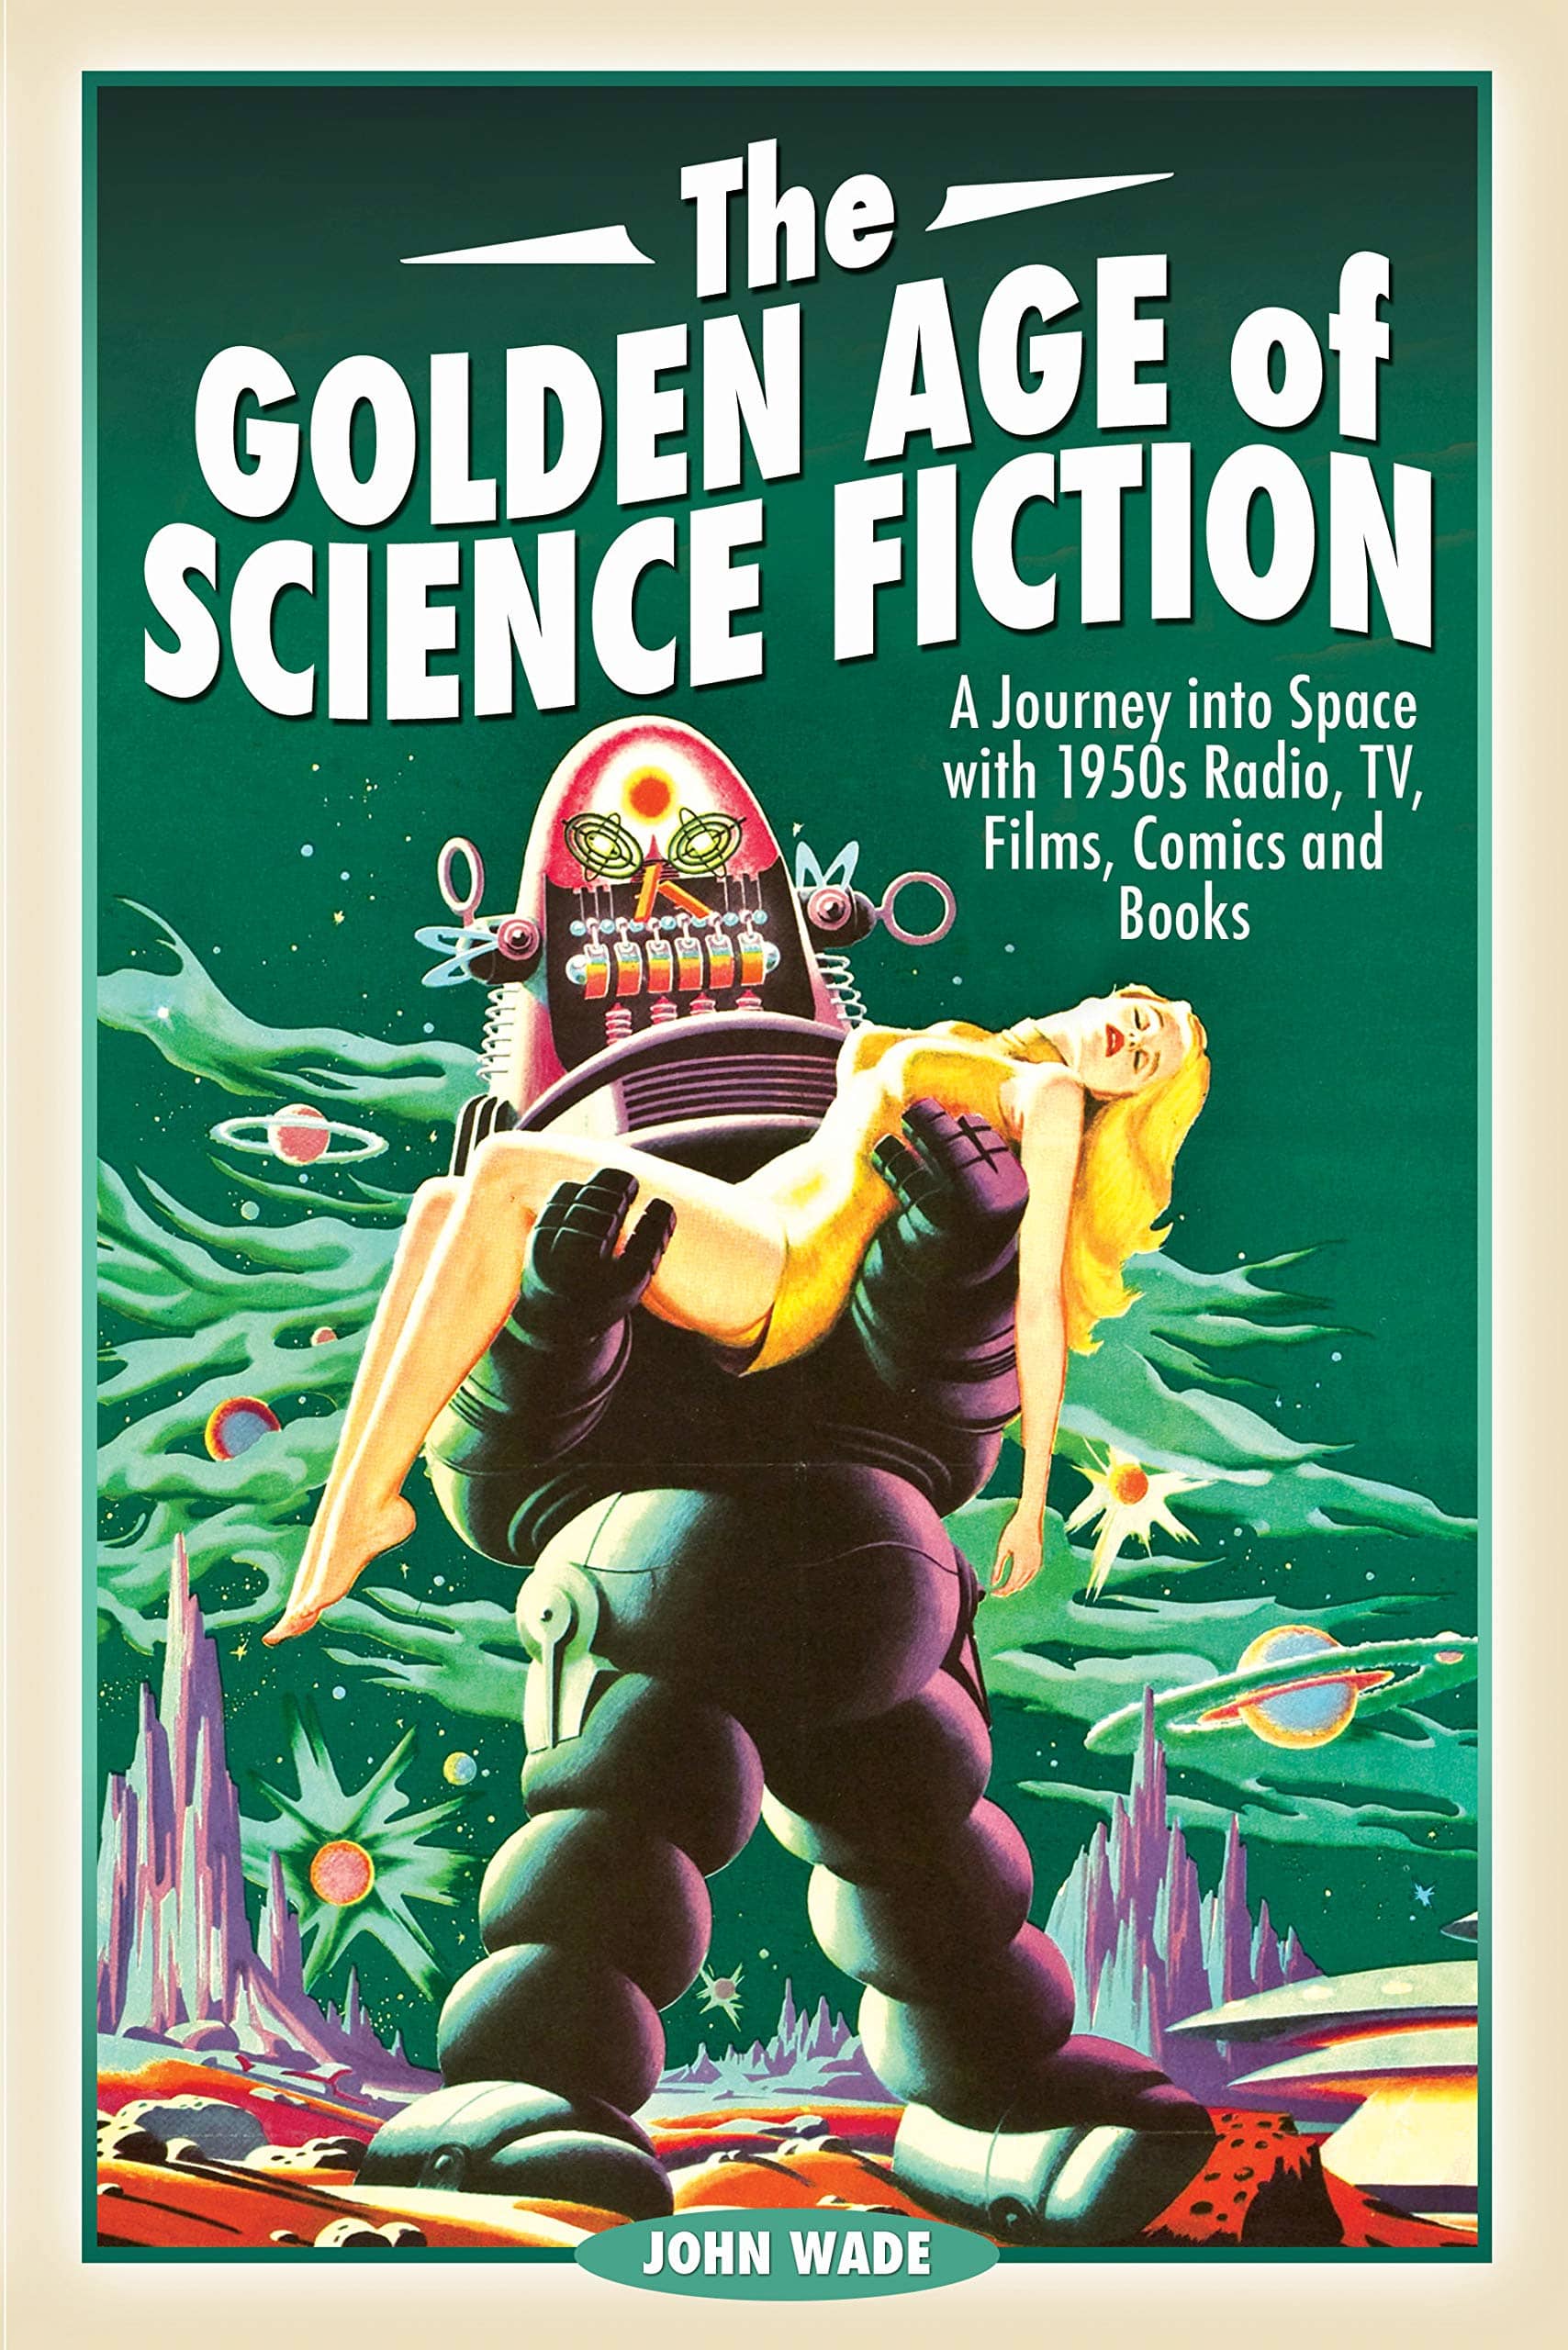 Future Treasures: The Golden Age of Science Fiction: A Journey into